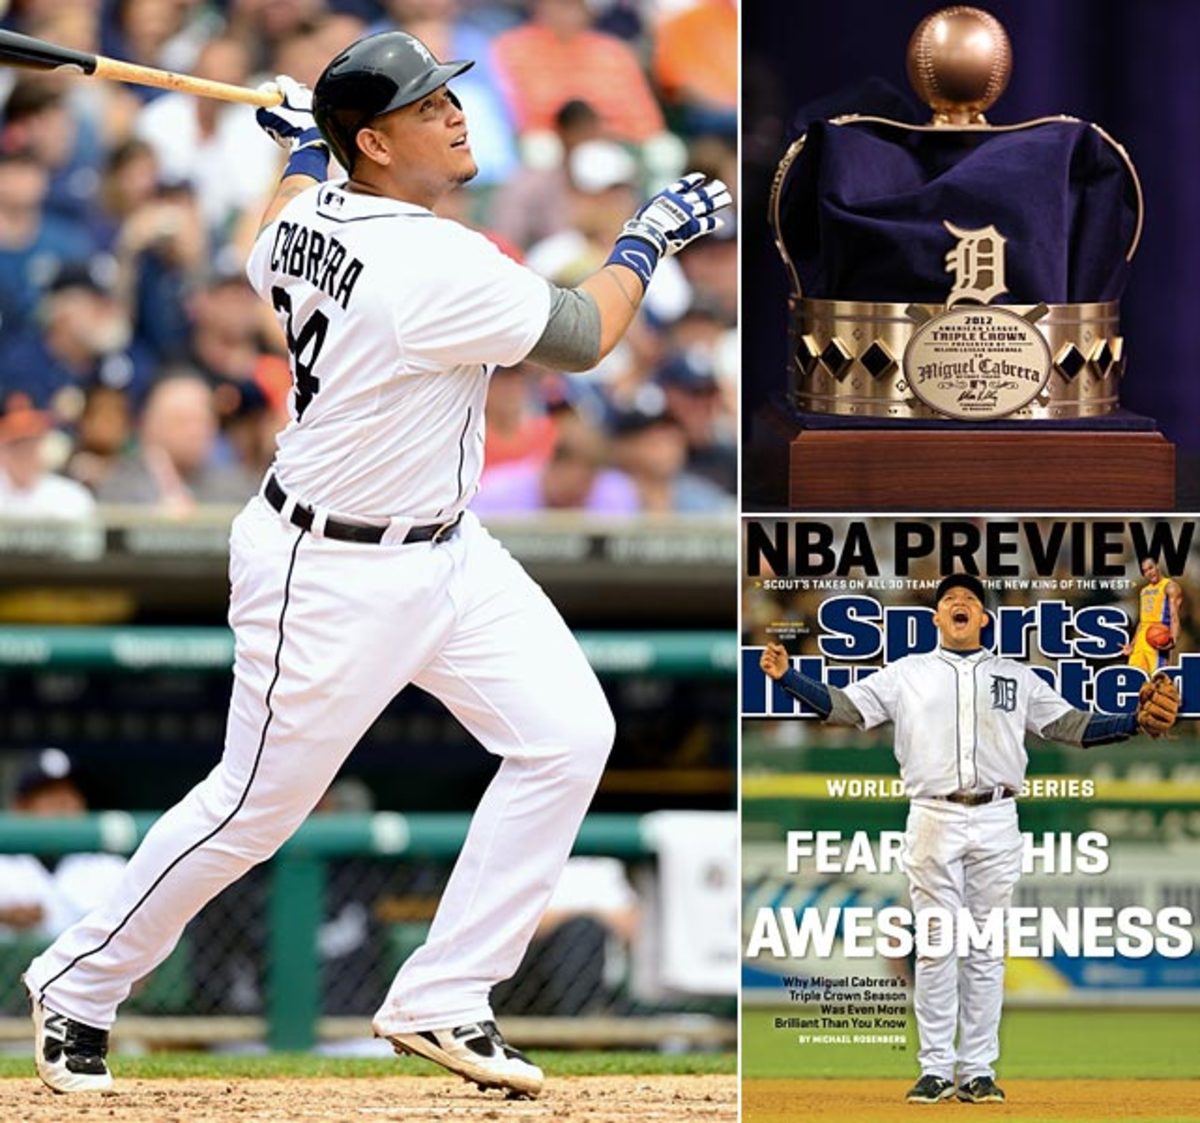 Miguel Cabrera won the Triple Crown, and now he's even better